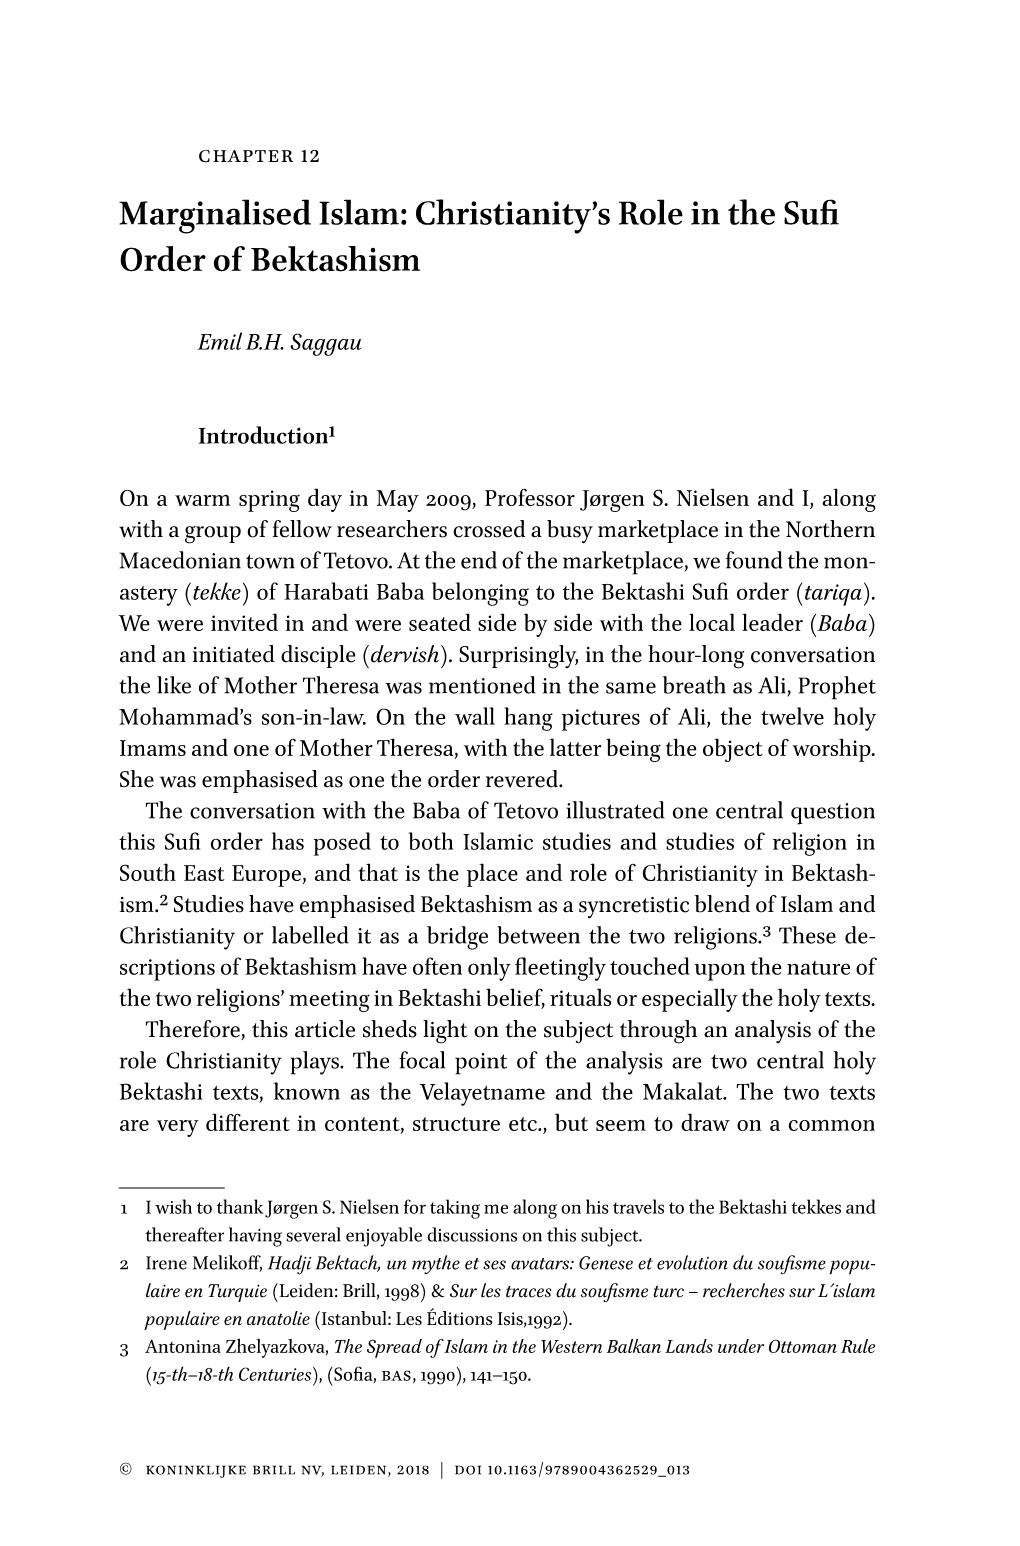 Christianity's Role in the Sufi Order of Bektashism